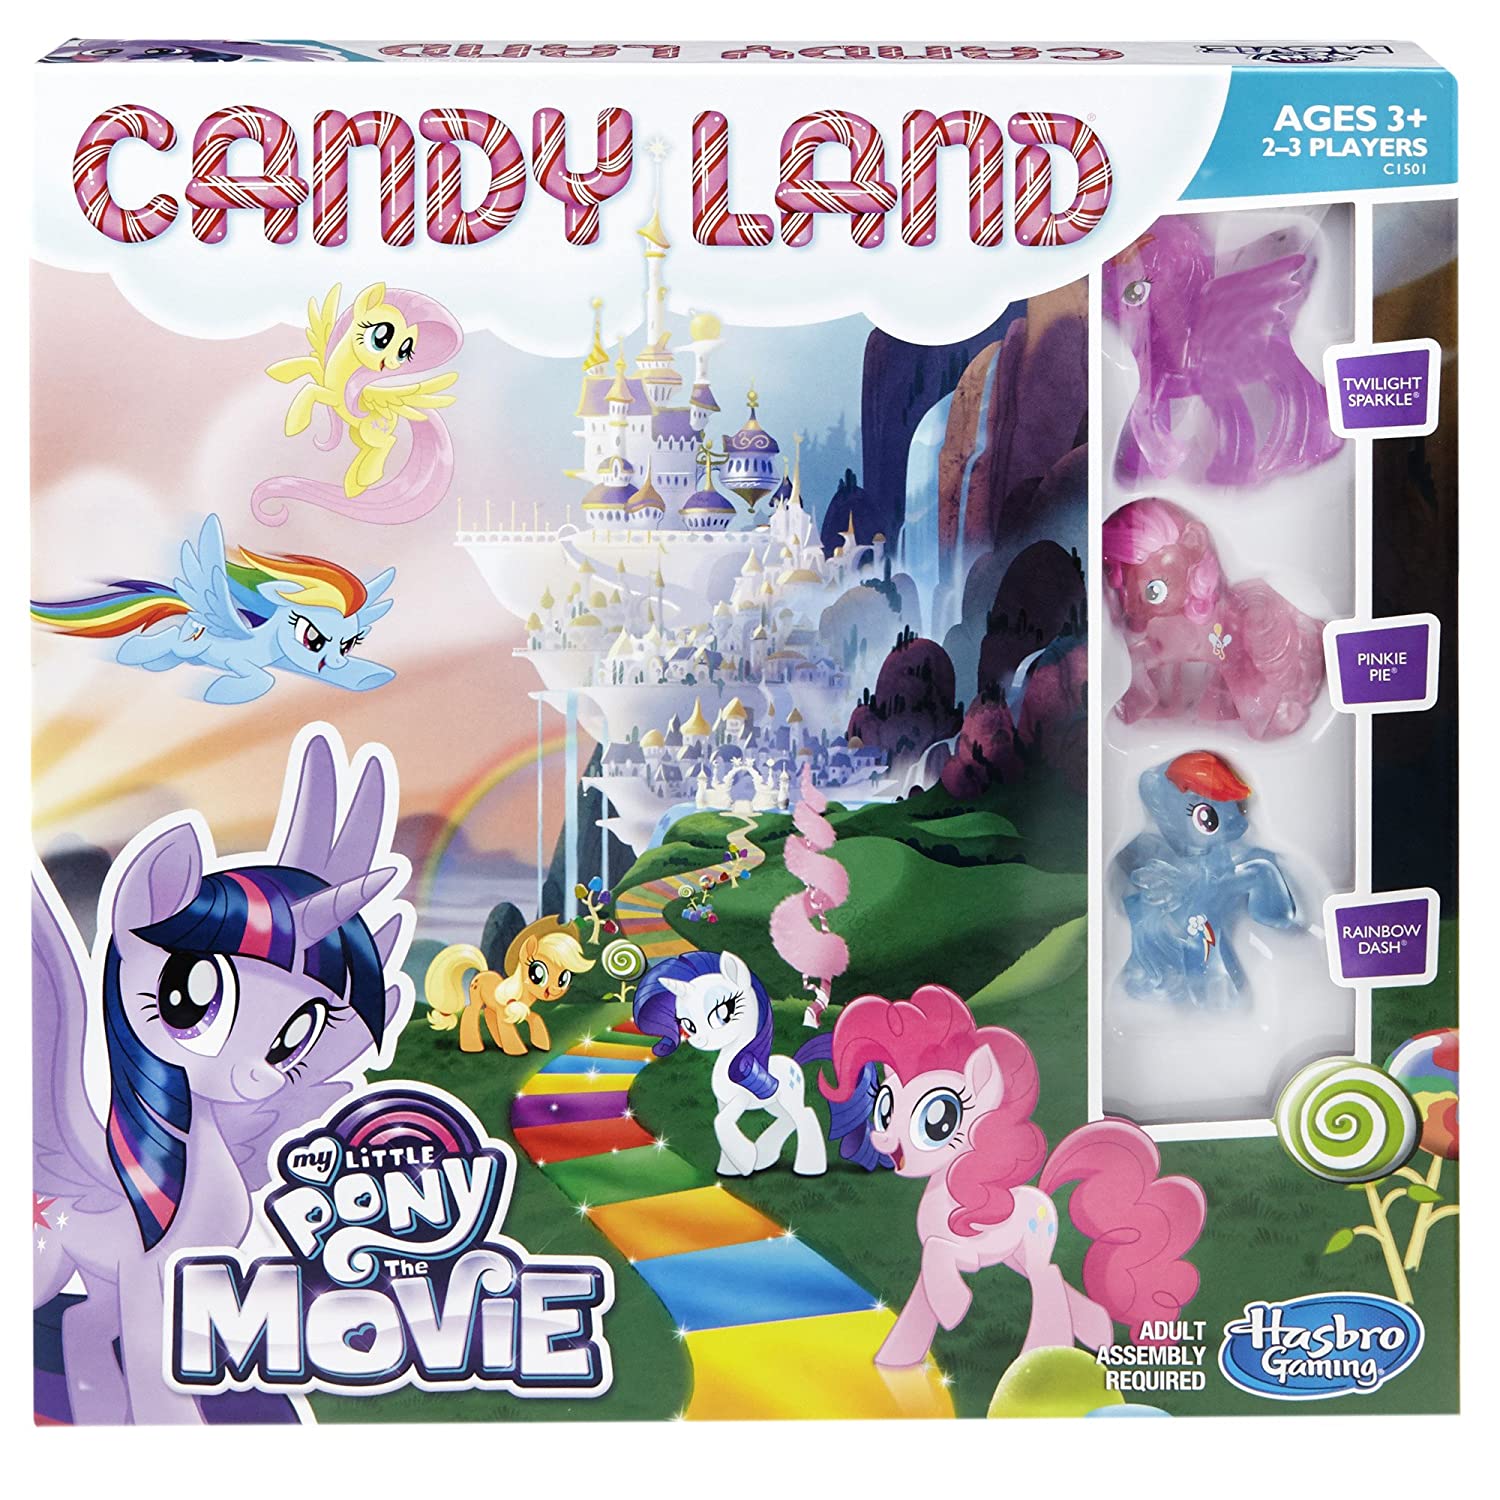 Top 11 Best My Little Pony Toys Reviews in 2022 5